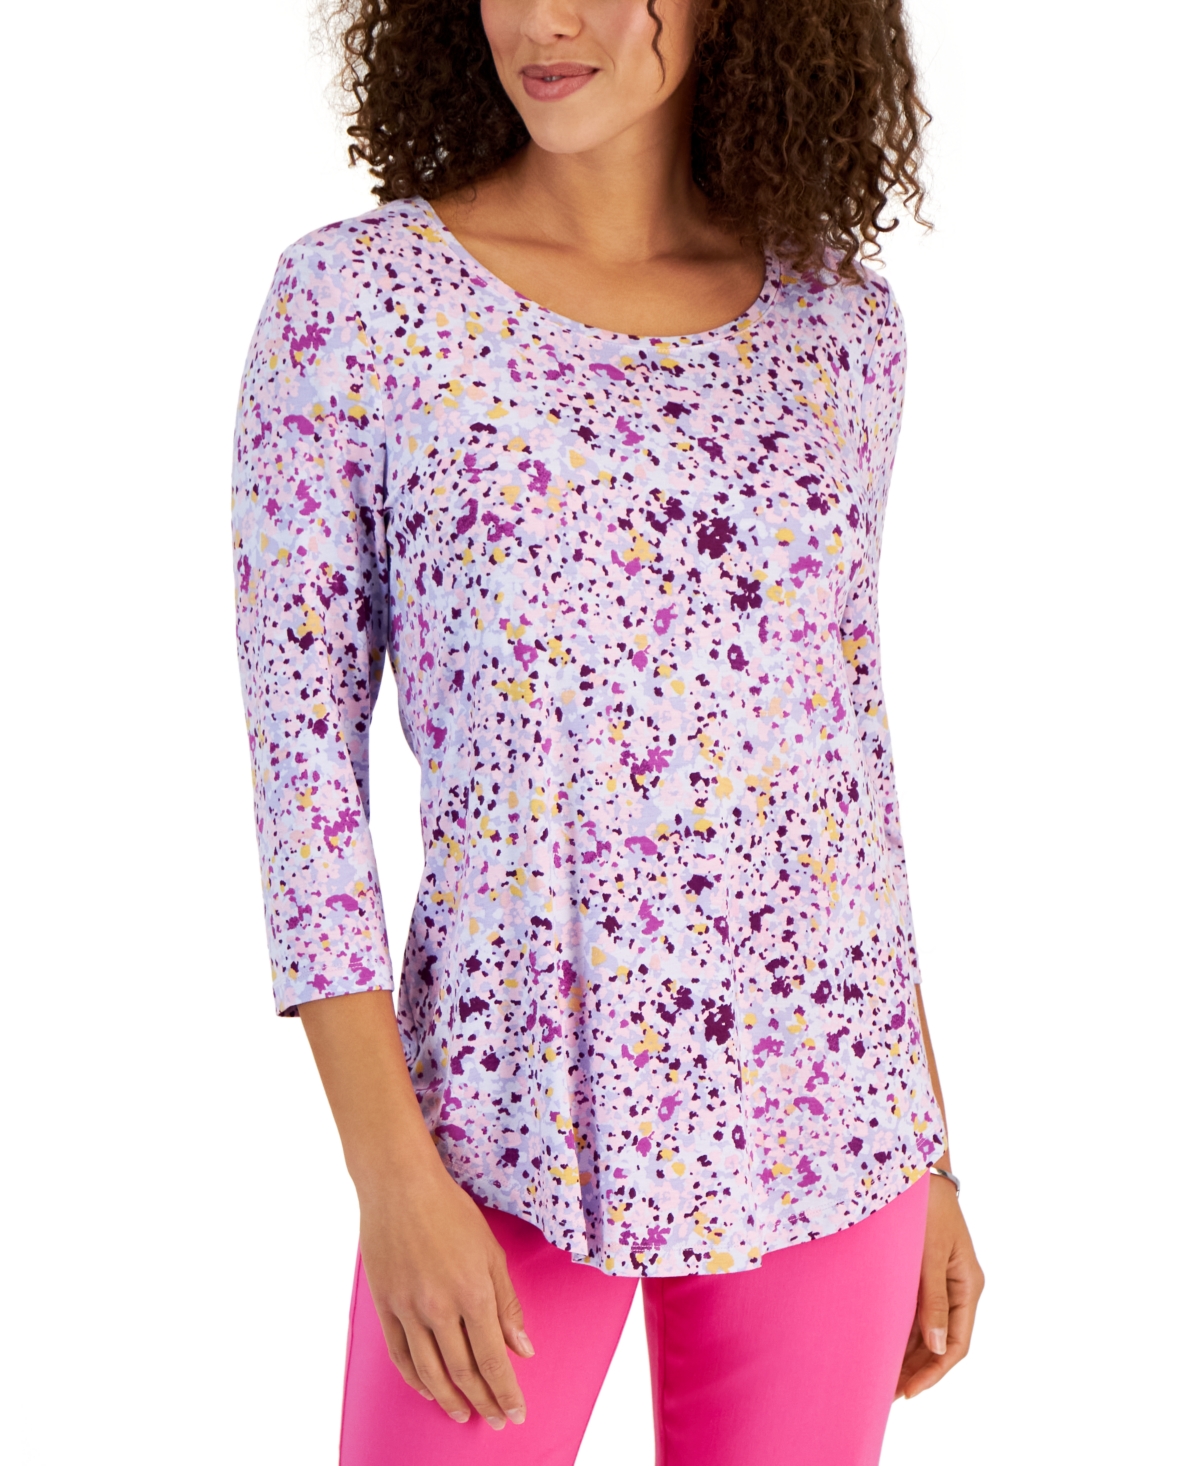 Jm Collection Women's Scoop Neck 3/4 Sleeve Printed Knit Top, Created For Macy's In Light Lavendar Combo